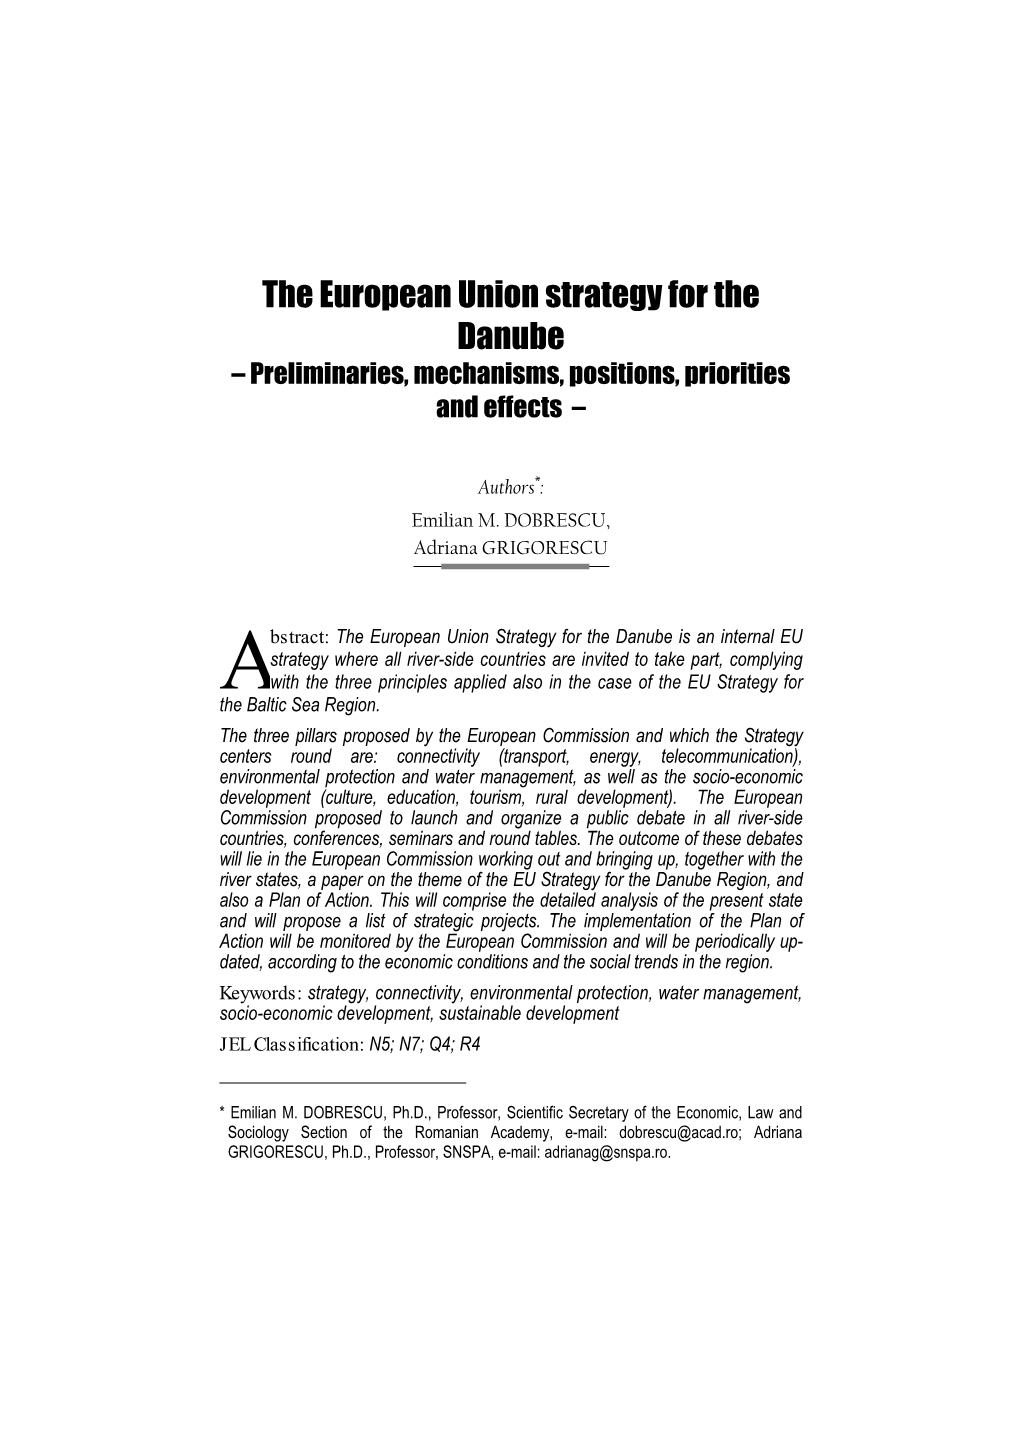 The European Union Strategy for the Danube – Preliminaries, Mechanisms, Positions, Priorities and Effects –